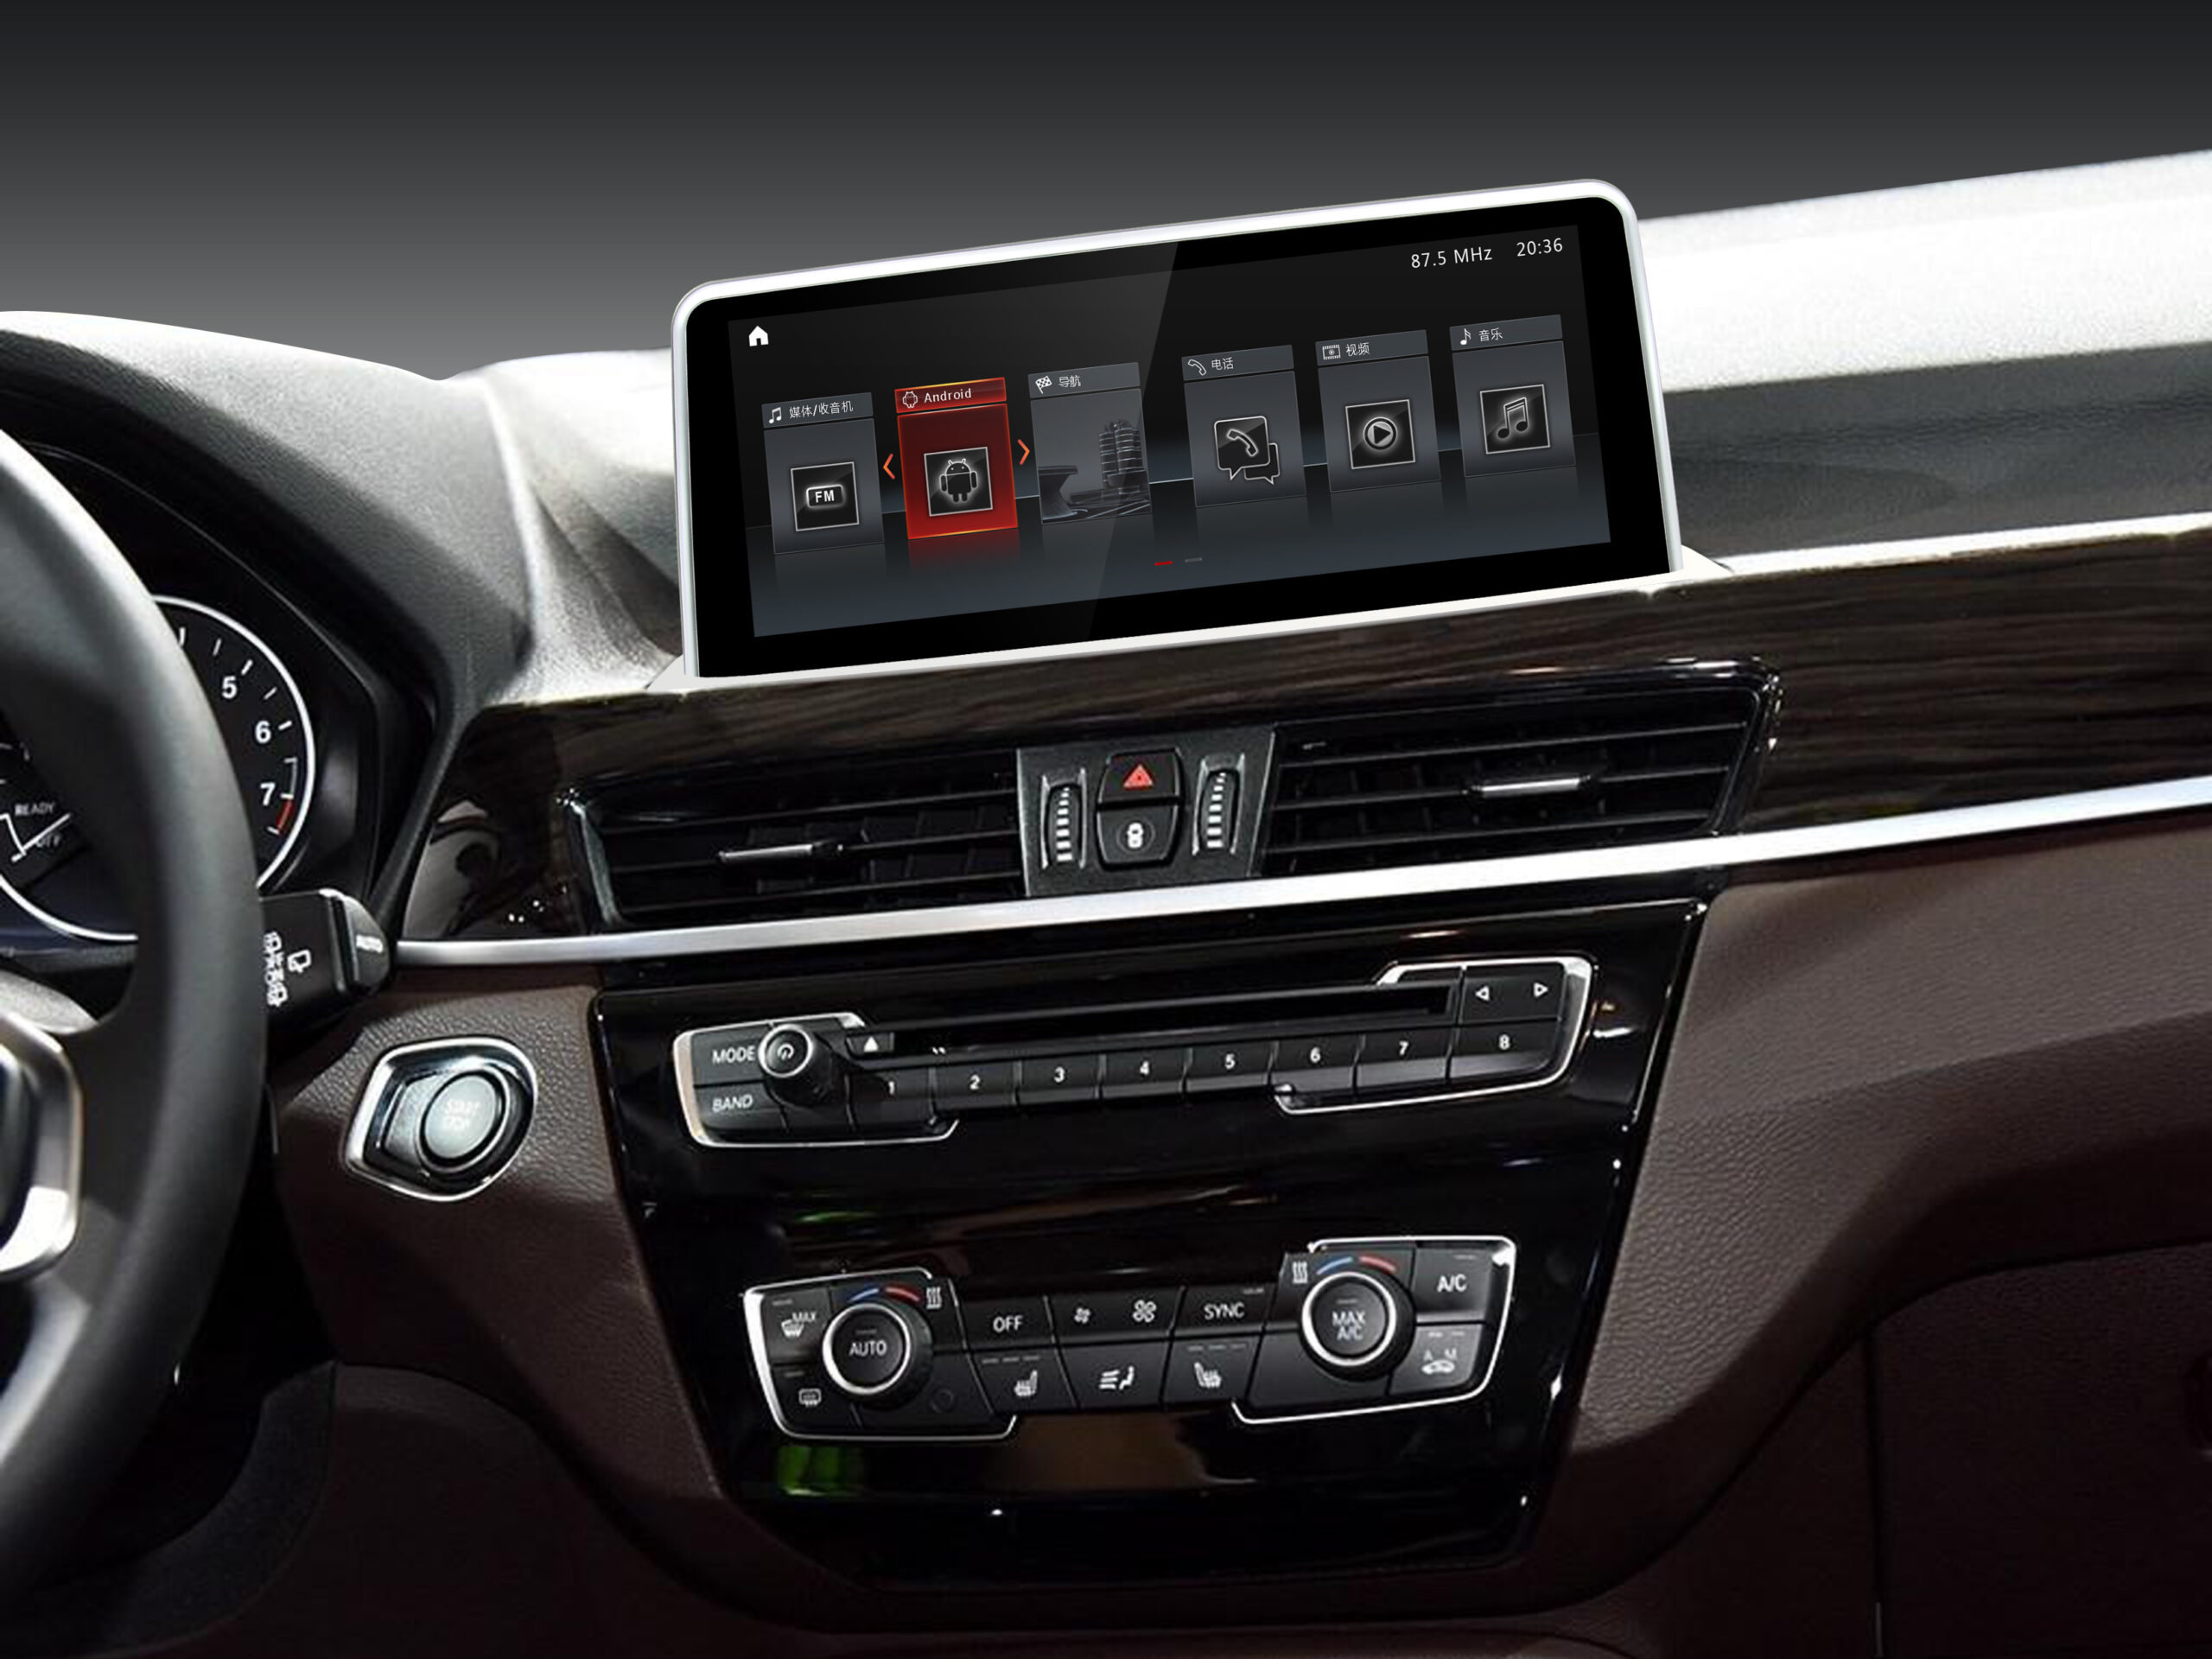 Rev Up Your Ride with These Top Car Radio Picks